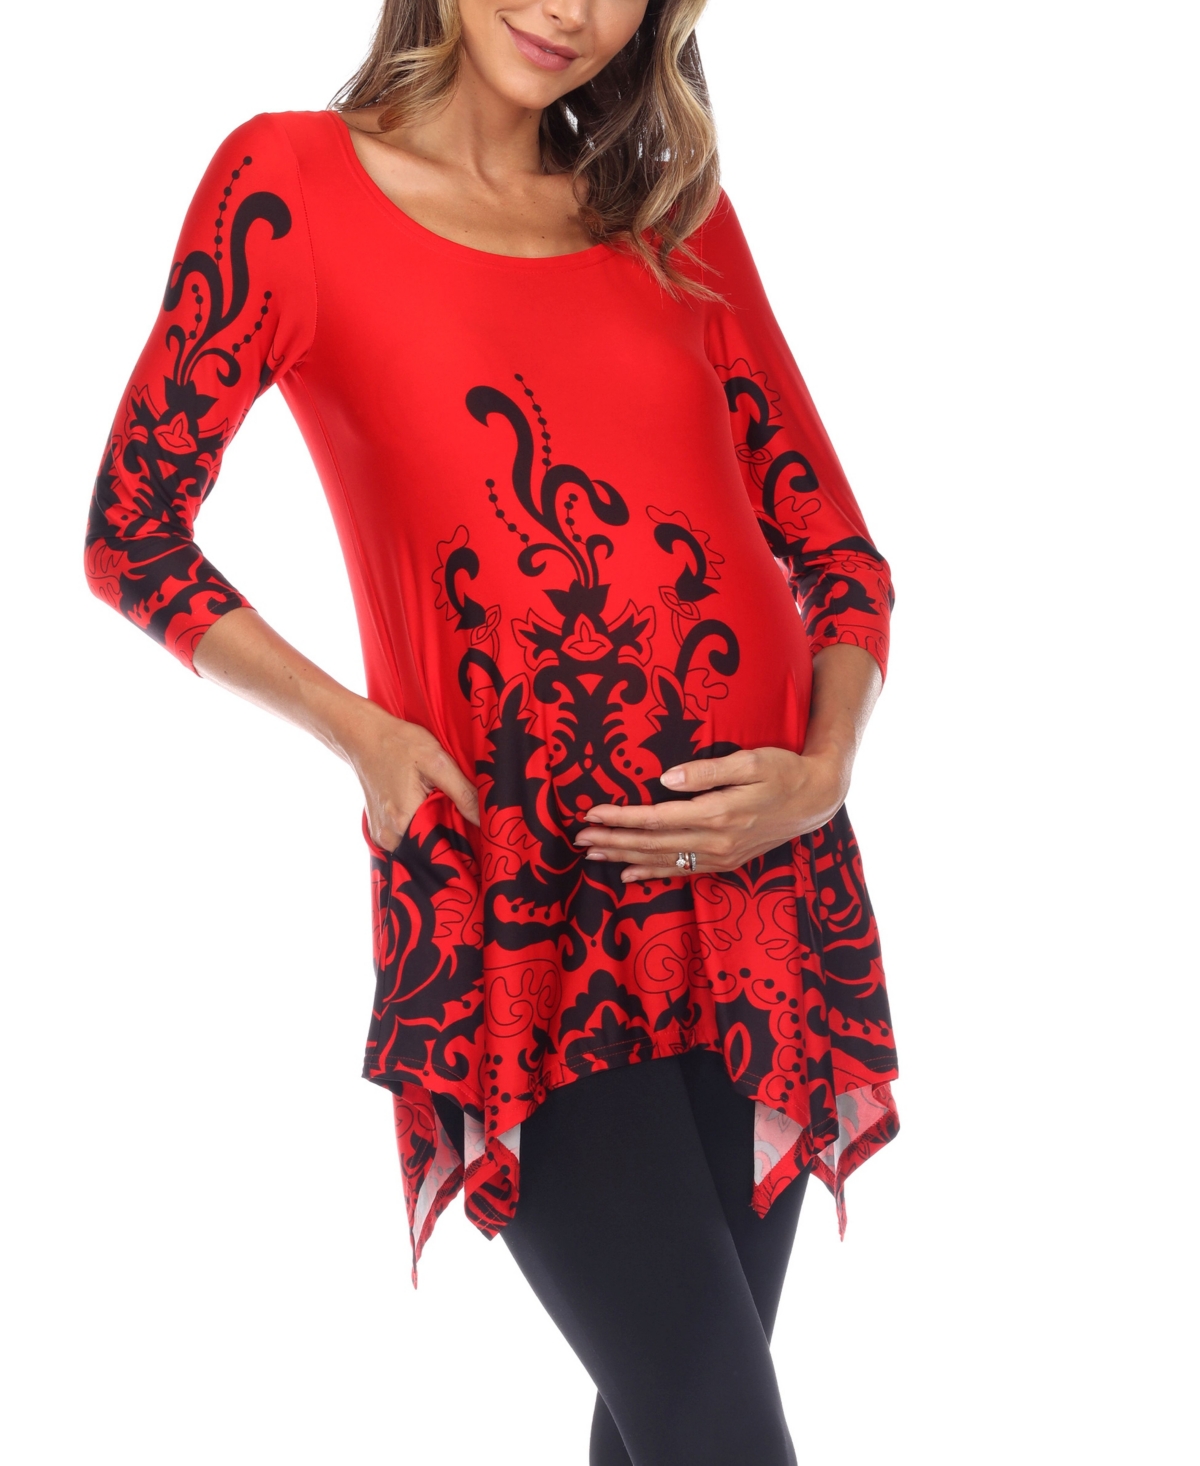 Maternity Ganette Tunic - Red and black